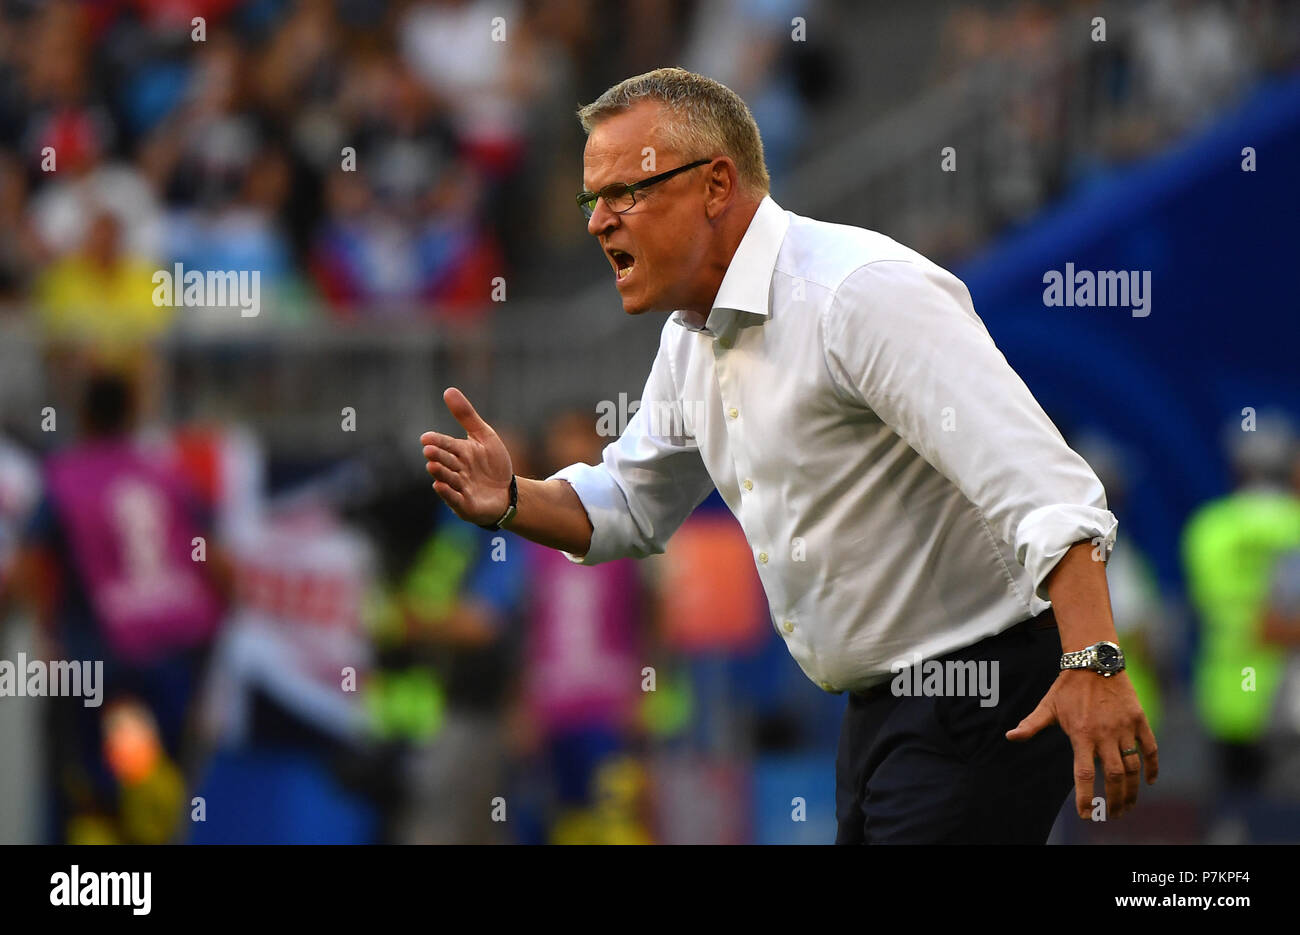 Samara, Russia. 7th July, 2018. Head coach Janne Andersson of Sweden gives instructions to players during the 2018 FIFA World Cup quarter-final match between Sweden and England in Samara, Russia, July 7, 2018. Credit: Li Ga/Xinhua/Alamy Live News Stock Photo